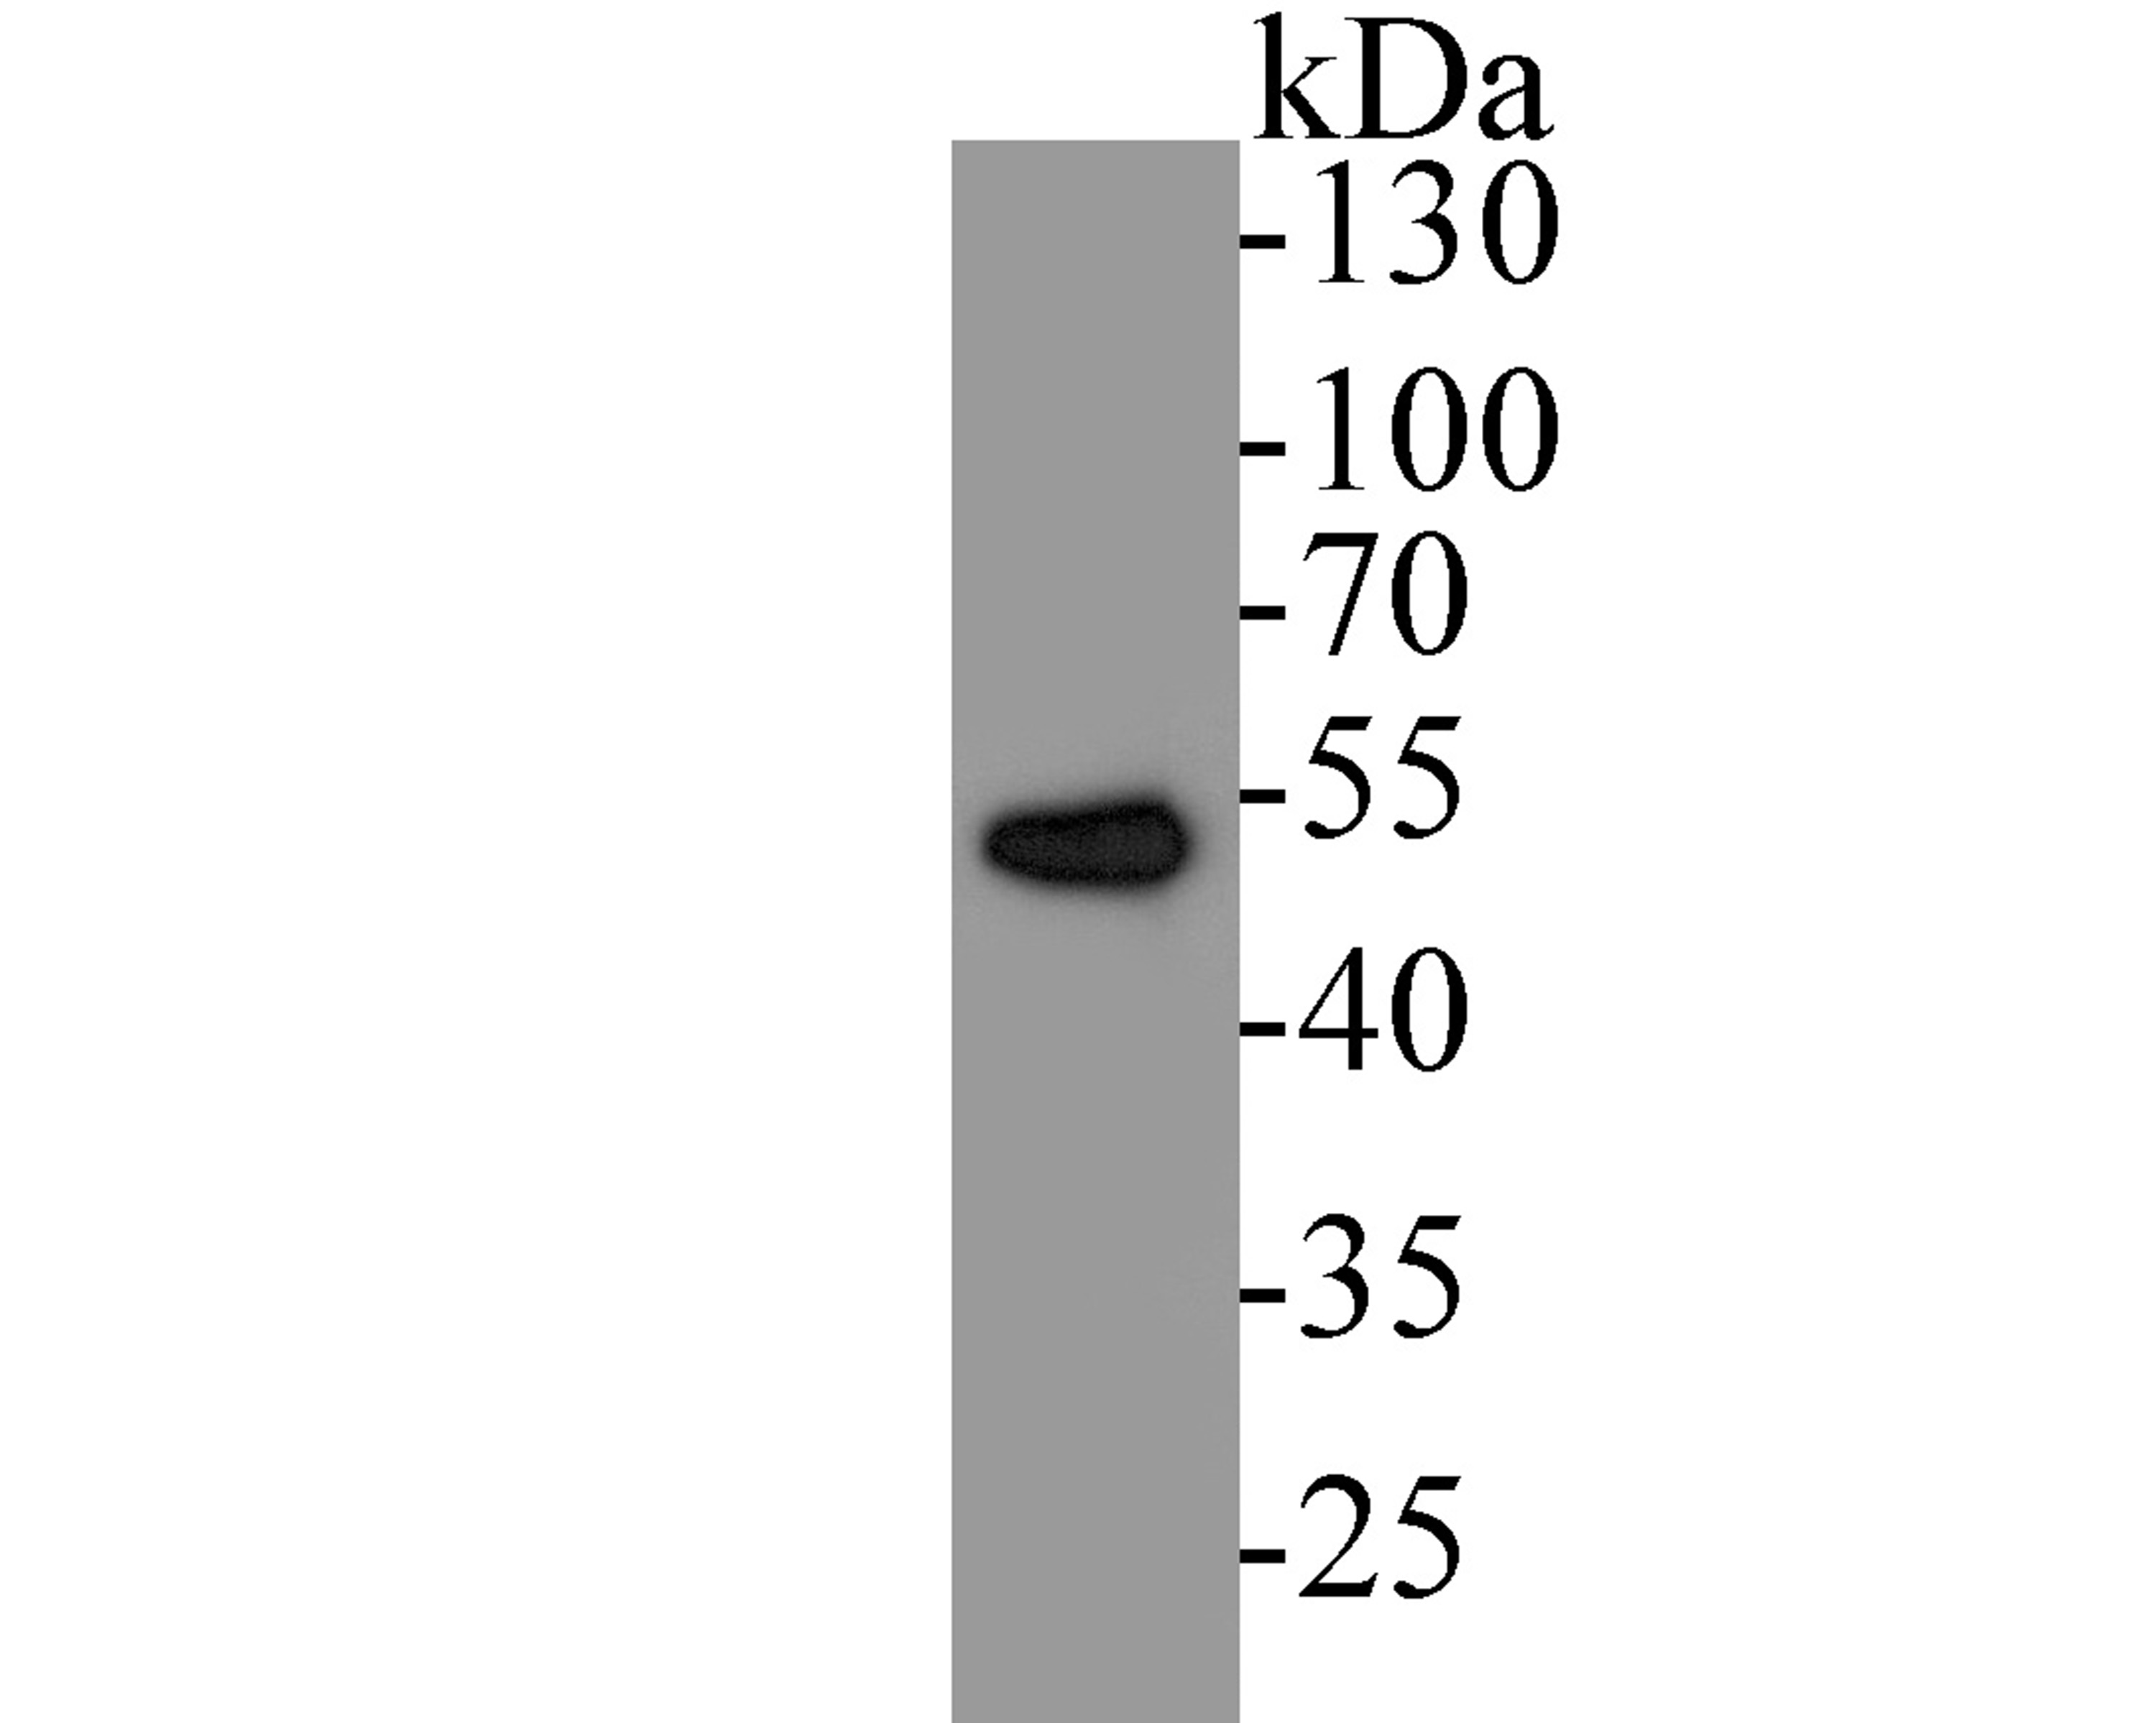 Western blot analysis of eIF3e on rat brain tissue lysates. Proteins were transferred to a PVDF membrane and blocked with 5% BSA in PBS for 1 hour at room temperature. The primary antibody (ET7110-40, 1/500) was used in 5% BSA at room temperature for 2 hours. Goat Anti-Rabbit IgG - HRP Secondary Antibody (HA1001) at 1:5,000 dilution was used for 1 hour at room temperature